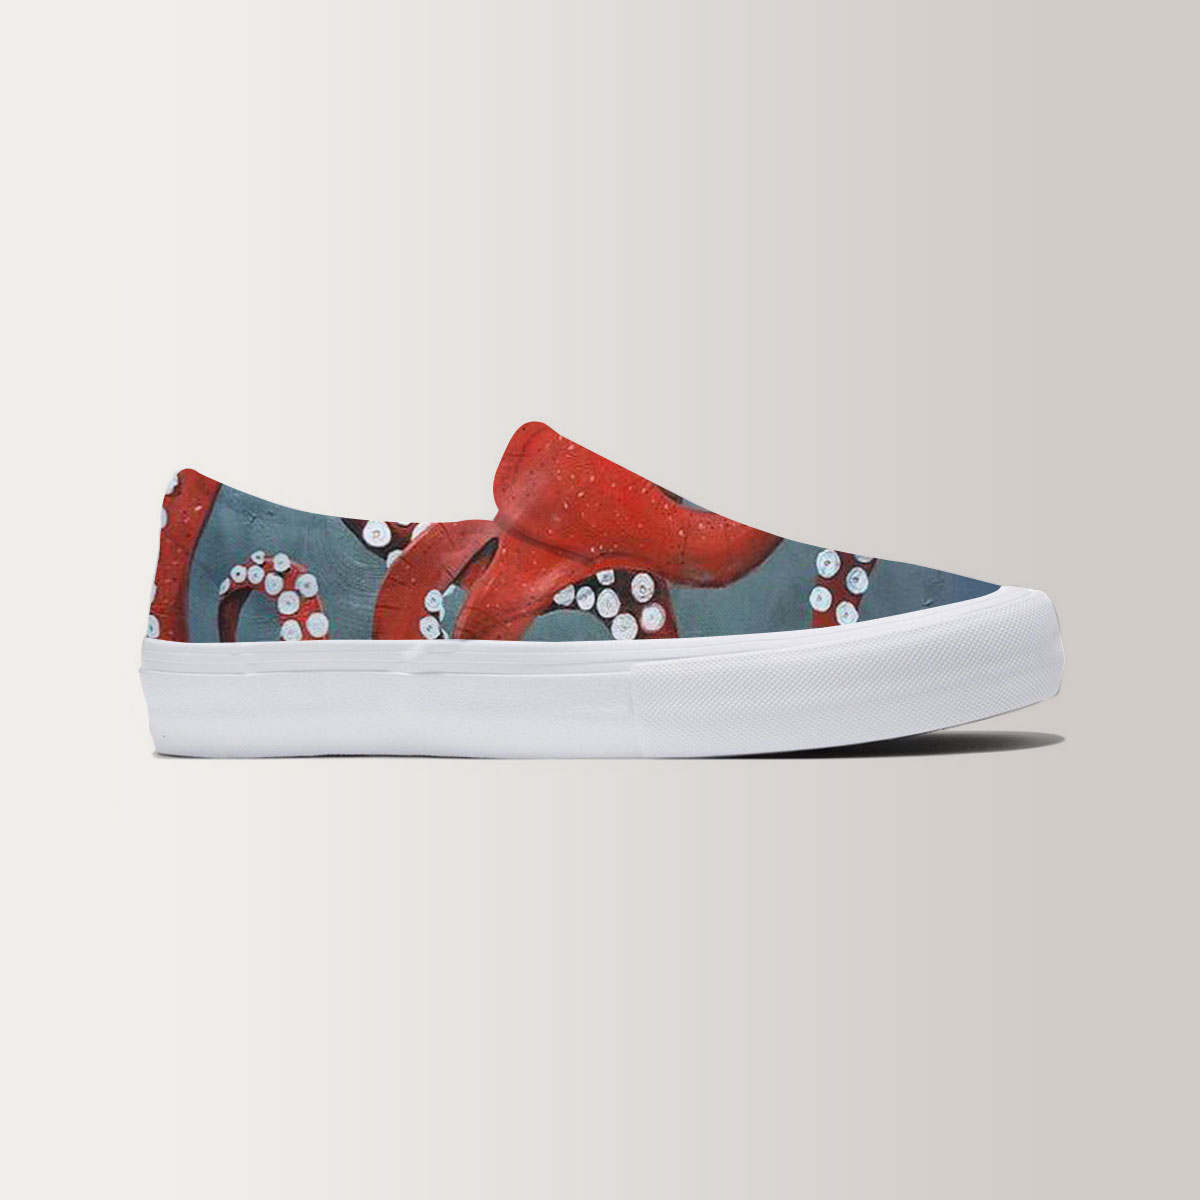 Giant Red Octopus Slip On Sneakers